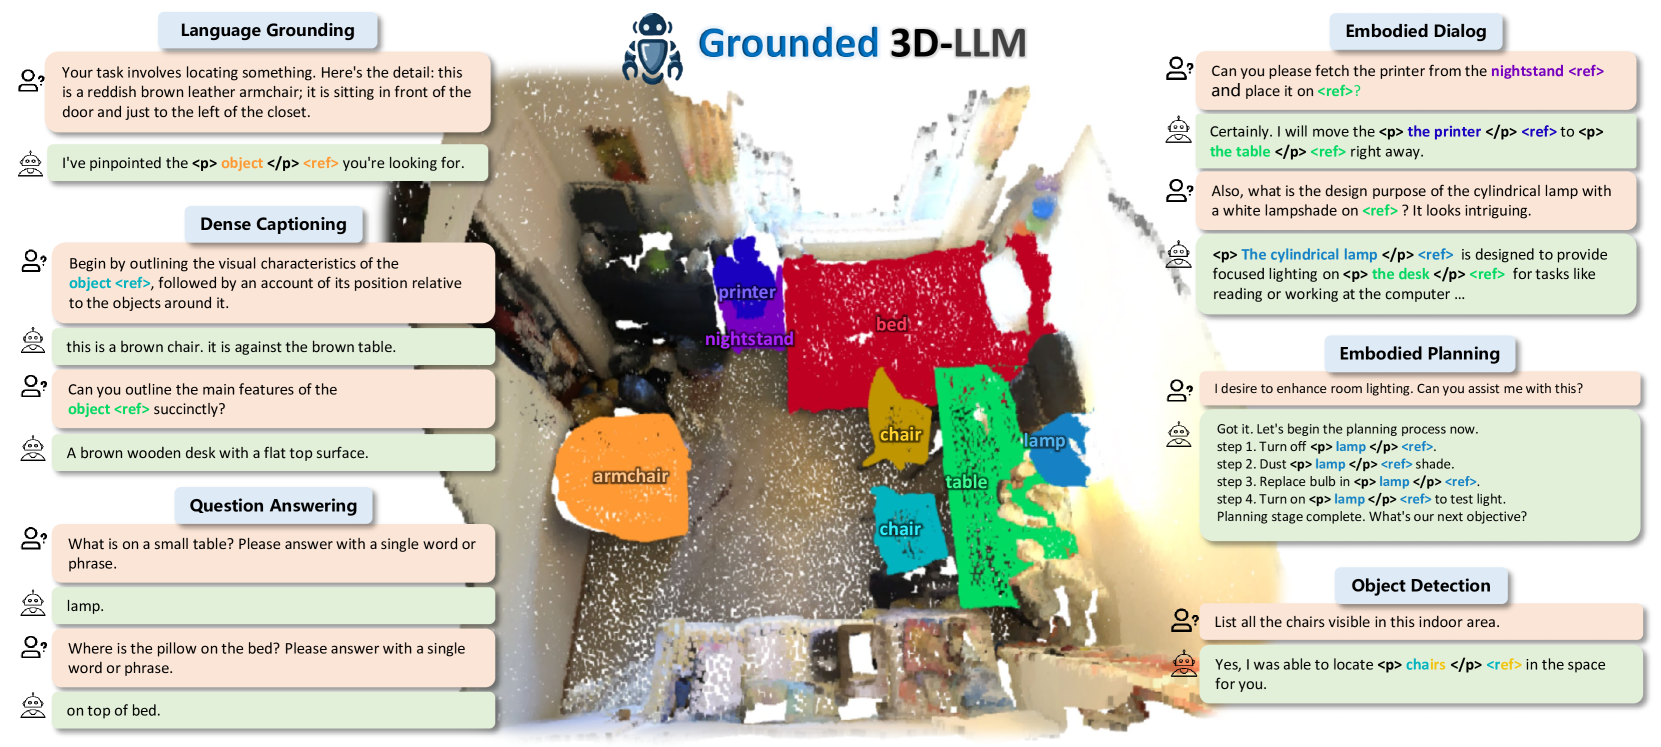 Grounded 3D-LLM with Referent Tokens